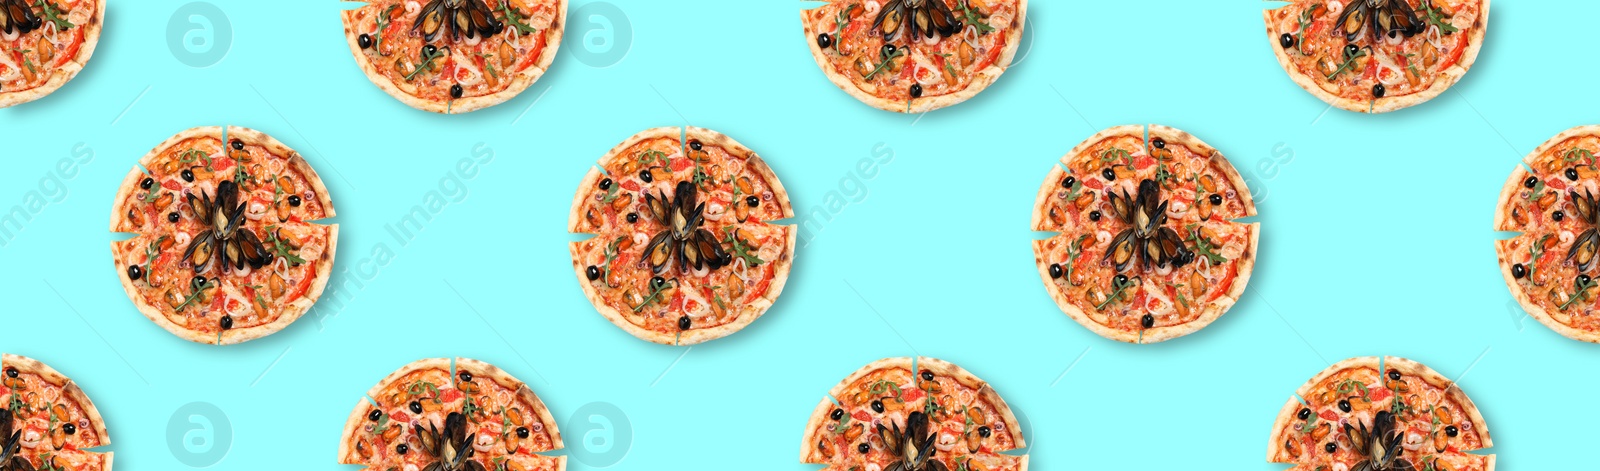 Image of Many delicious seafood pizzas on turquoise background, flat lay. Seamless pattern design